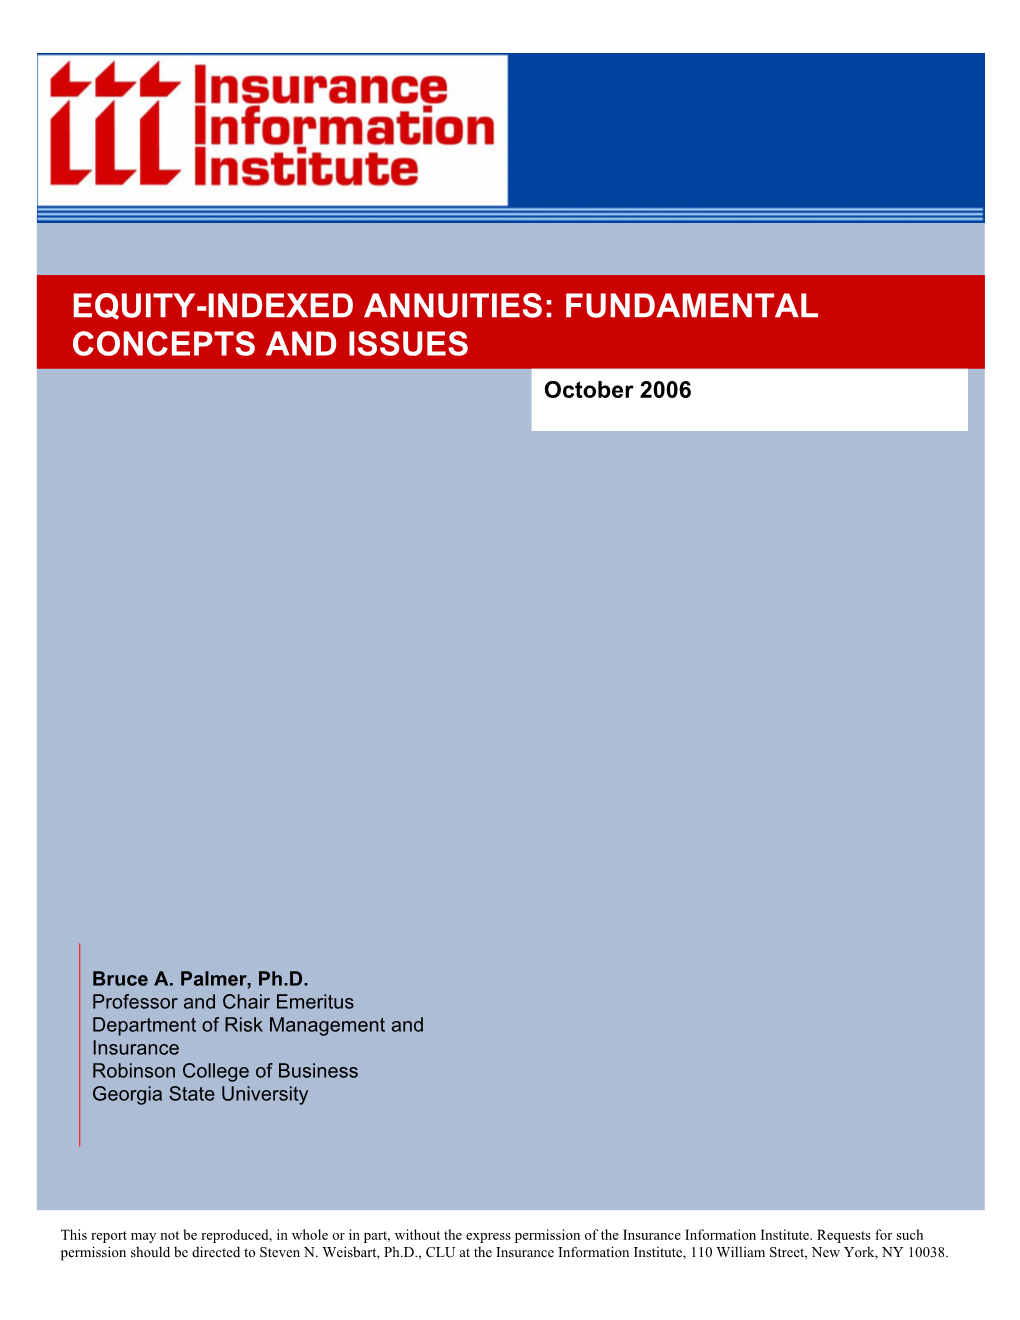 EQUITY-INDEXED ANNUITIES: FUNDAMENTAL CONCEPTS and ISSUES October 2006